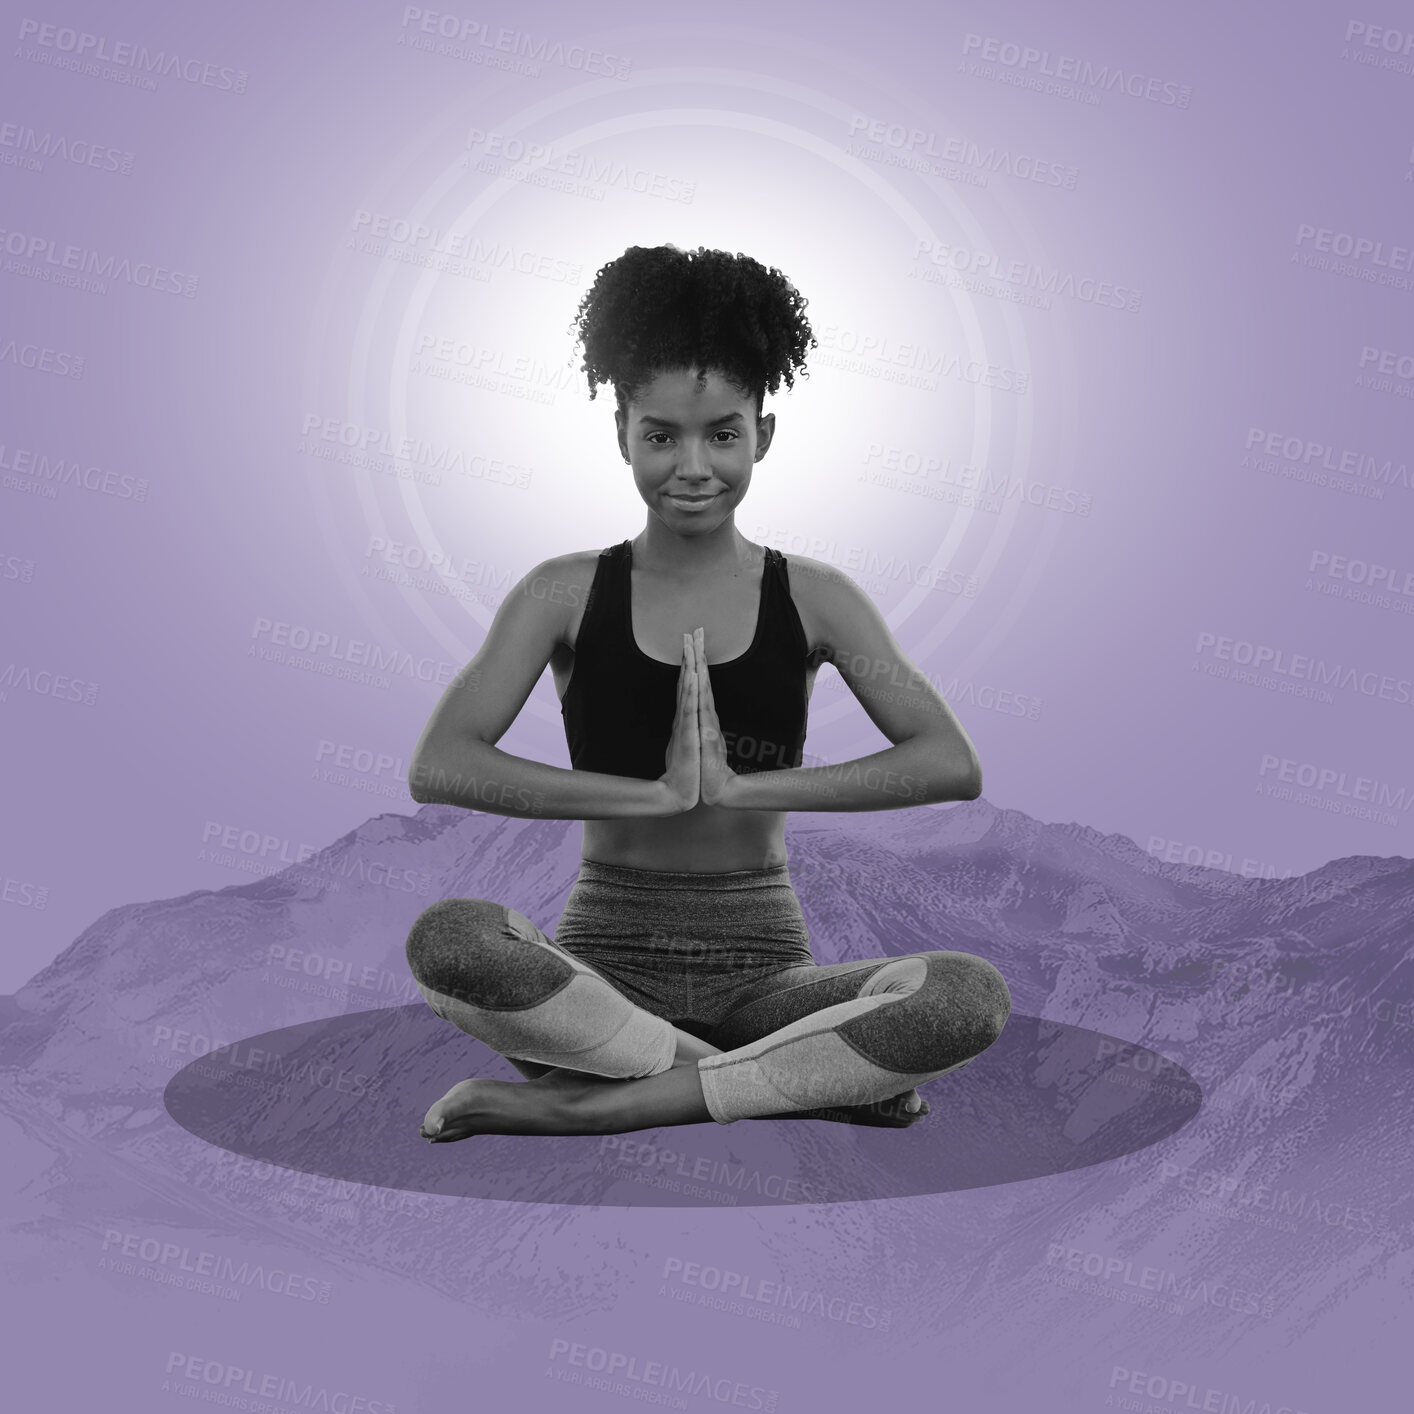 Buy stock photo Zen, meditation and black woman on poster, mountain on purple background and lotus pose in balance. Art, yoga advertising and creative collage design for wellness, calm and spiritual lifestyle studio